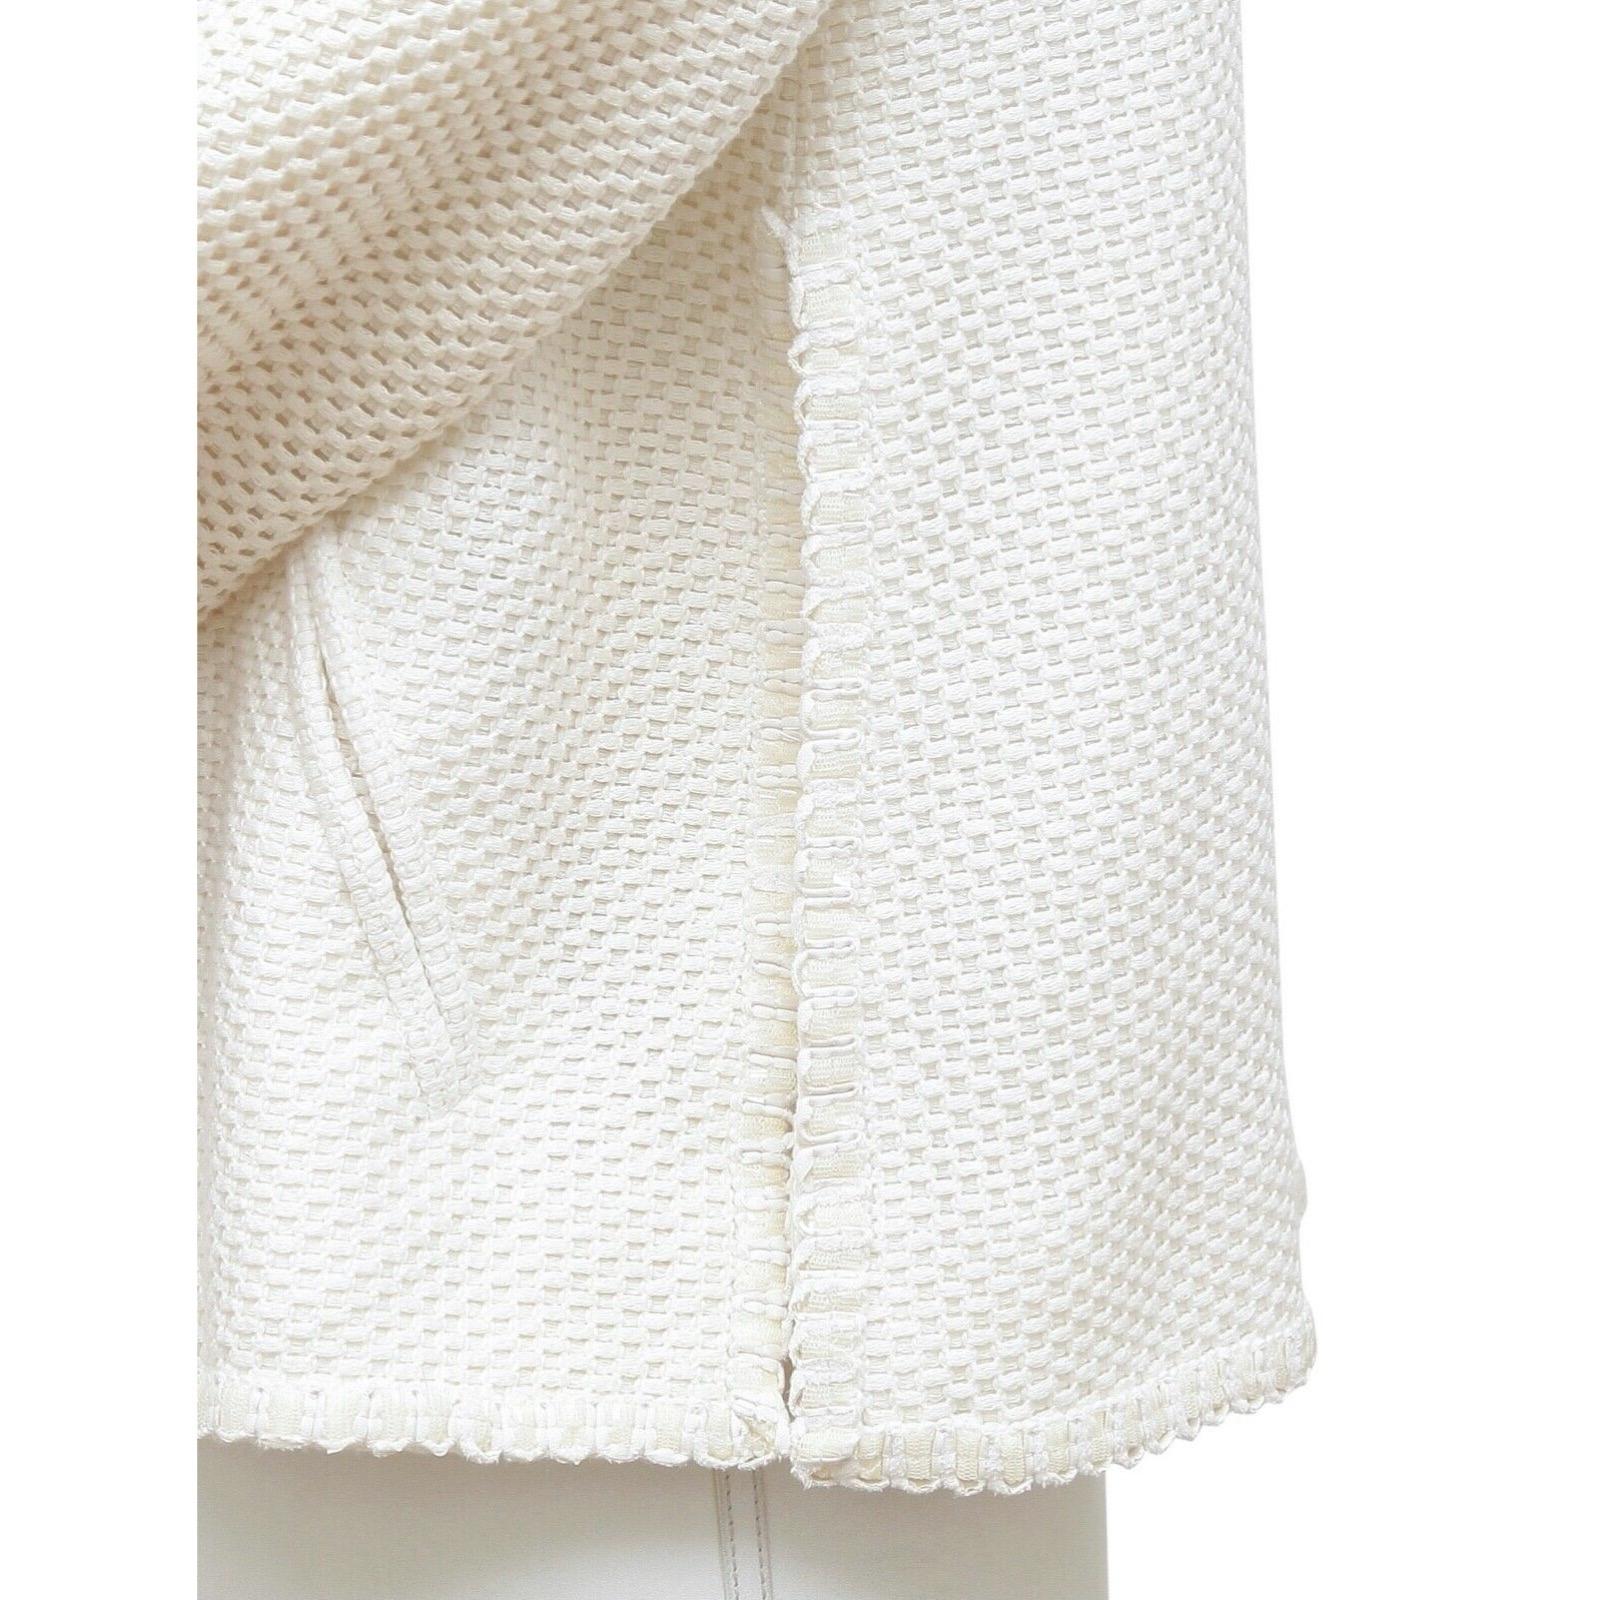 CHANEL Tweed Jacket Coat White Pearl 3/4 Sleeve Double Breasted 2013 13S Sz 34 For Sale 2